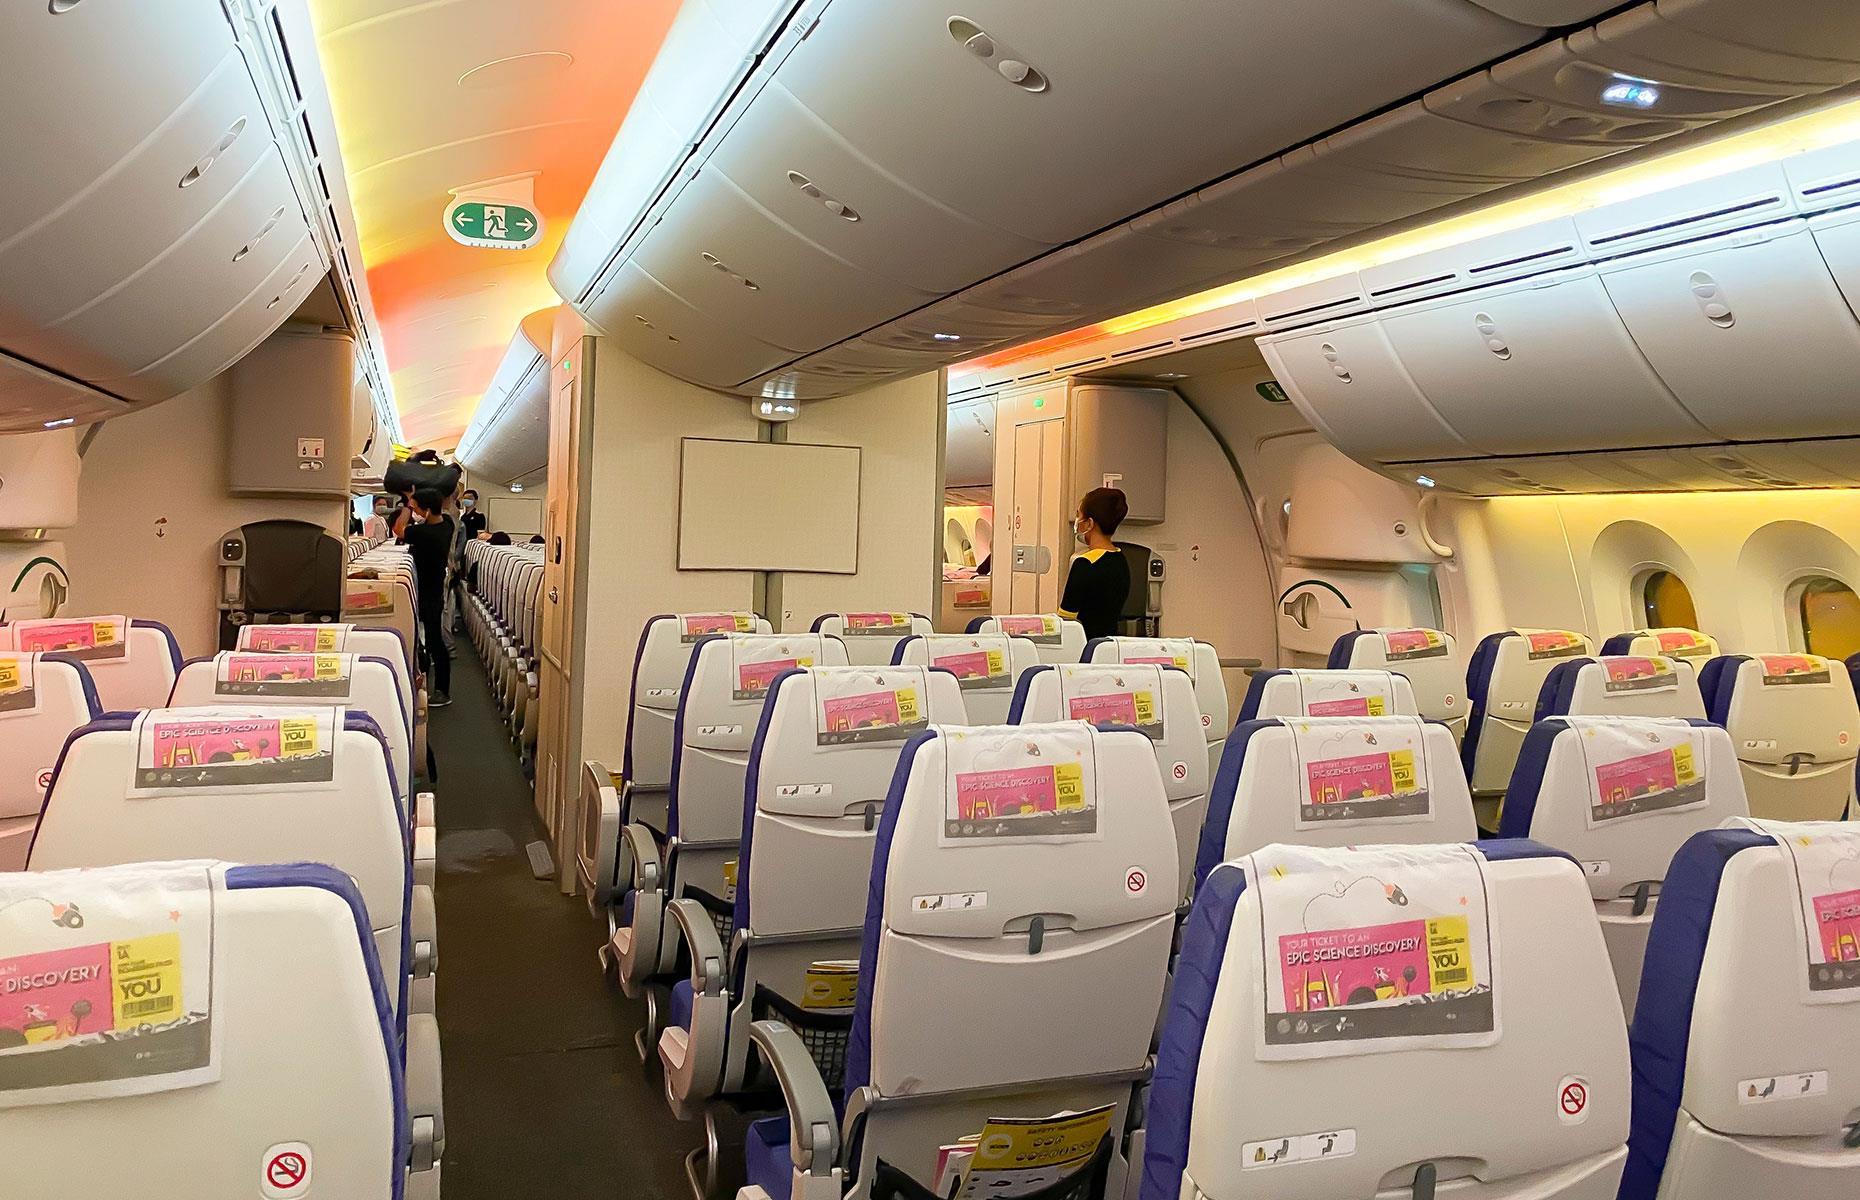 <p>Scoot, owned by the Singapore Airlines Group, has been awarded first place for budget travellers seeking long-haul destinations for two consecutive years now. The airline's economy class offers three fares: Fly, FlyBag and FlyBagEat. The cheapest fare is Fly, allowing carry-on of up to 10kg (22 pounds) per passenger; FlyBag includes 20kg (44-pound) checked baggage; and FlyBagEat adds on a hot meal.</p>